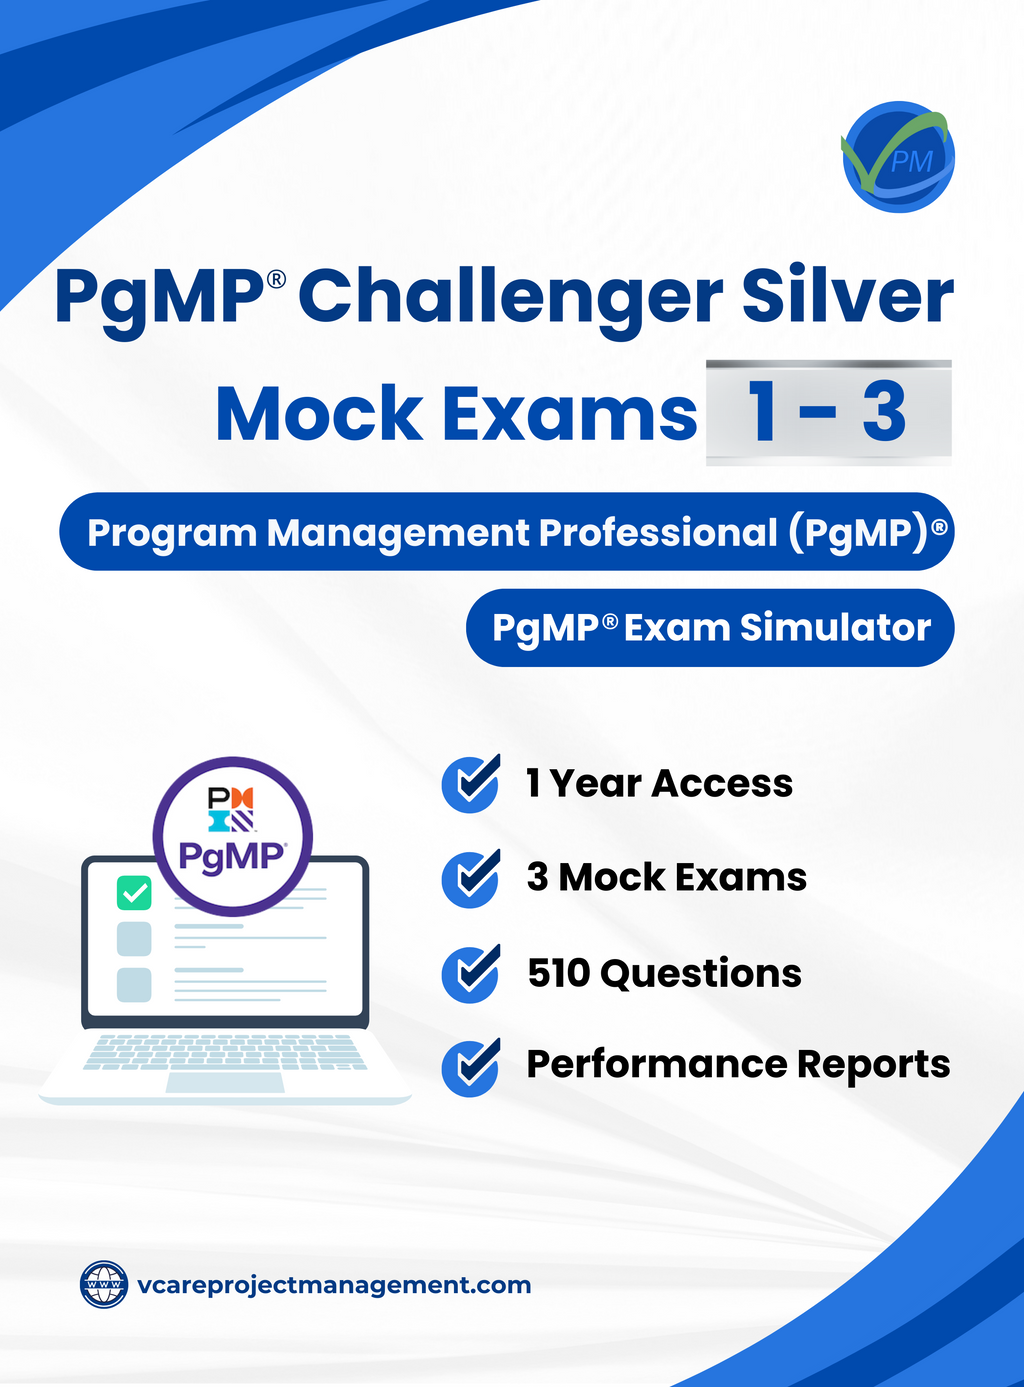 PgMP Challenger Silver (Mock Exams 1 to 3) - 1 Year Access